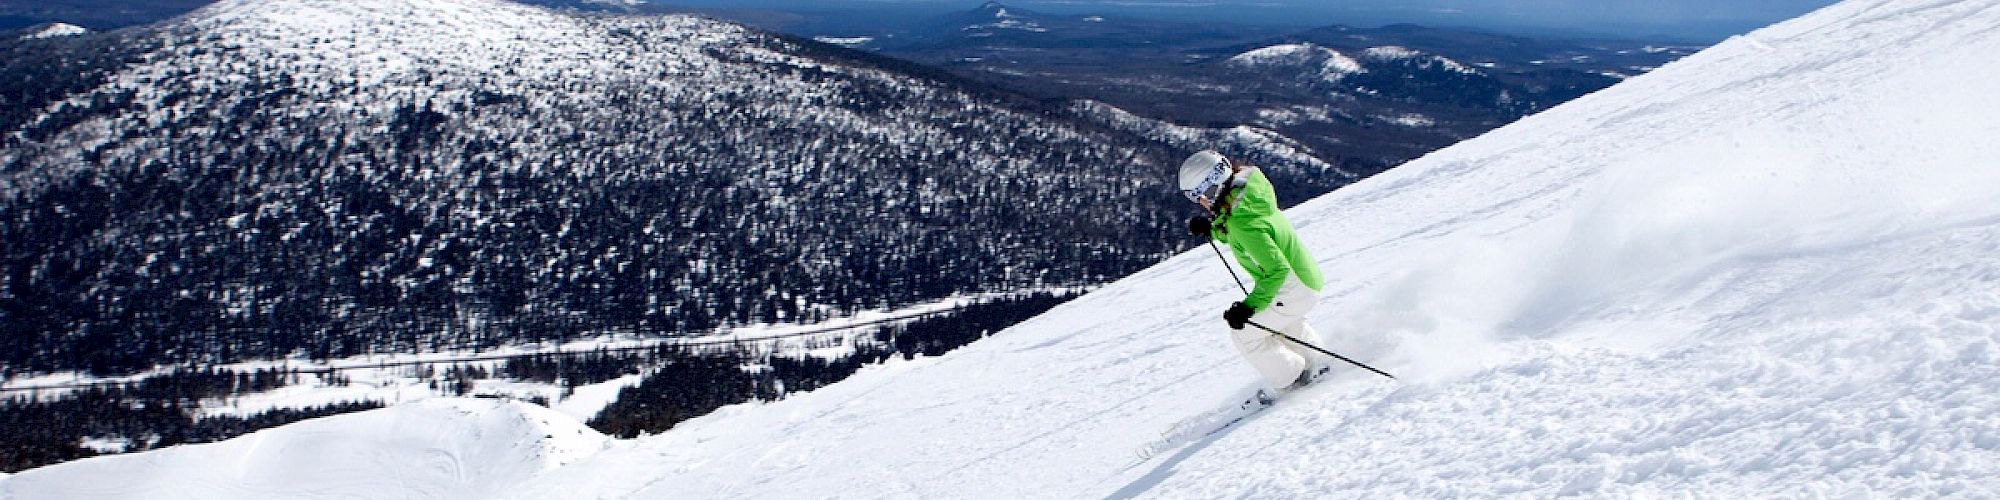 A skier in a bright green jacket descends a snowy slope with mountainous terrain and distant forests in the background.